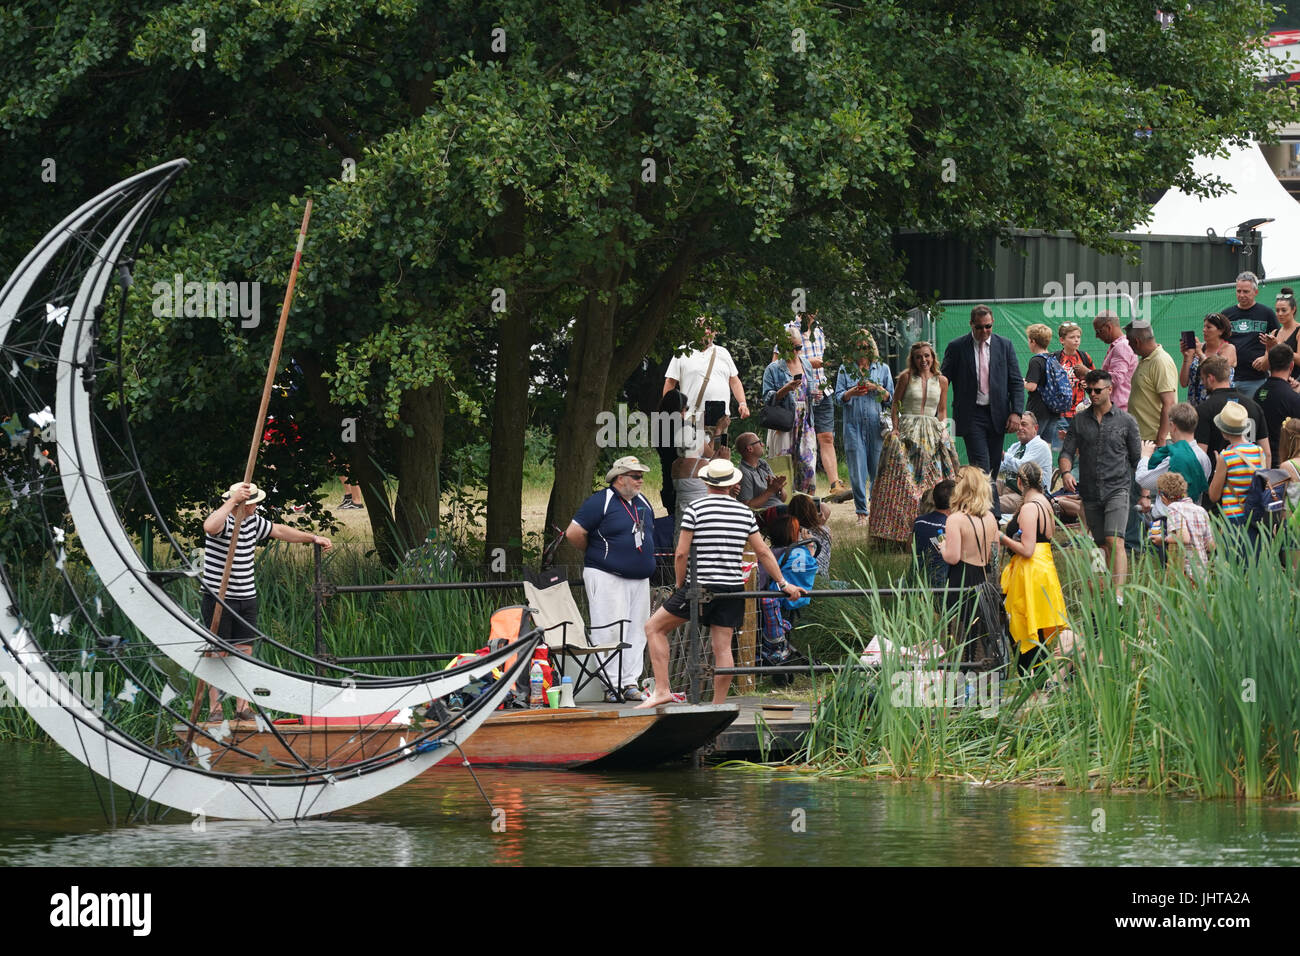 Latitude Festival, UK. 16th July, 2017. Katherine Jenkins arriving to get in a punt before performing on the stage by the lake on day 4 (Sunday) of the 2017 Latitude festival in Henham Park, Southwold in Suffolk. Photo date: Sunday, July 16, 2017. Photo credit should read: Roger Garfield/Alamy Live News. Stock Photo